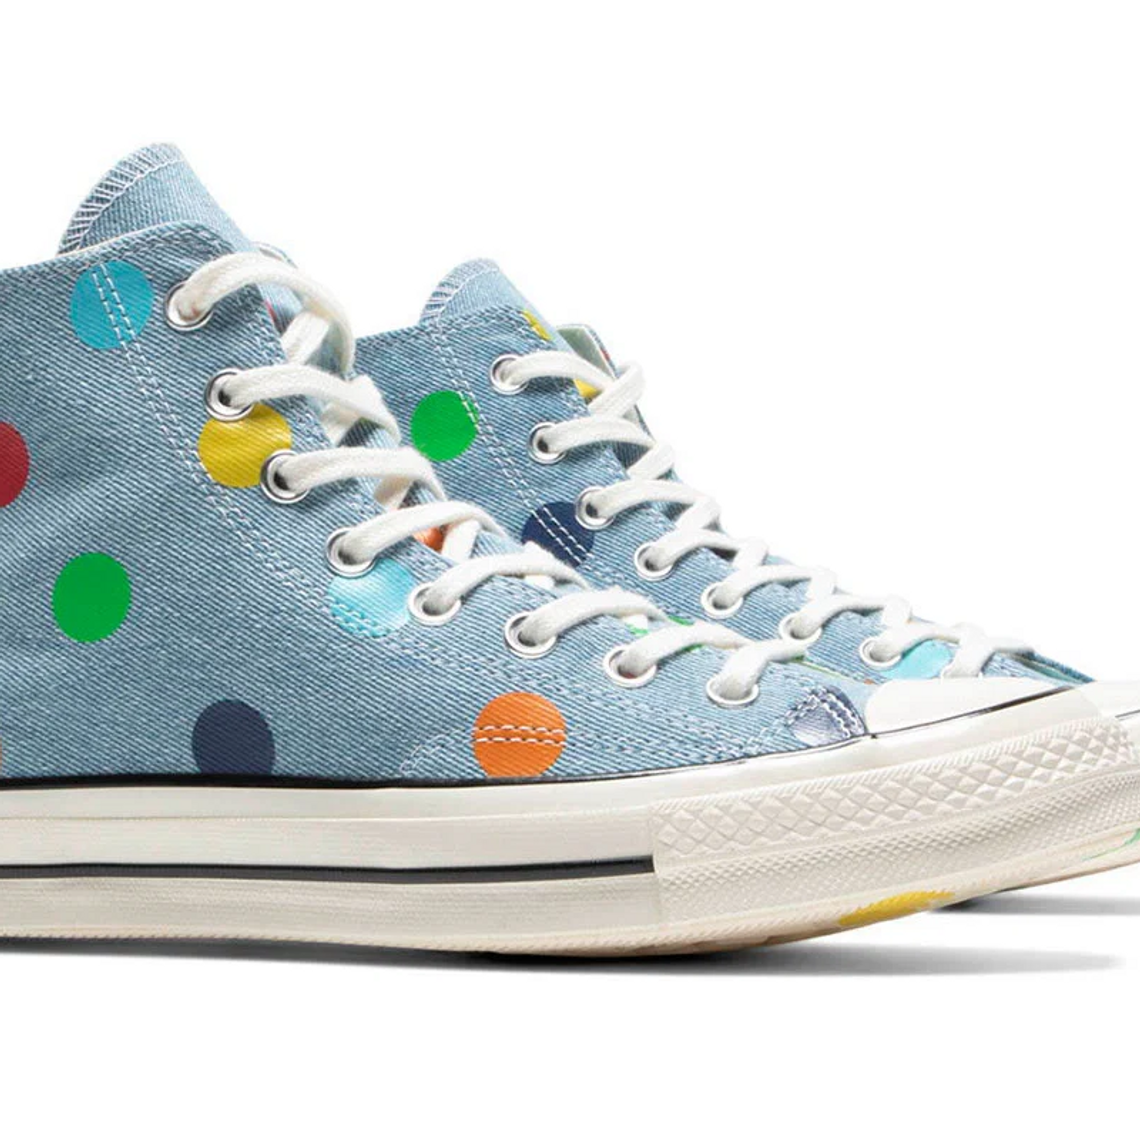 Tyler, The Creator x Converse Just Dropped Another Collab: How to